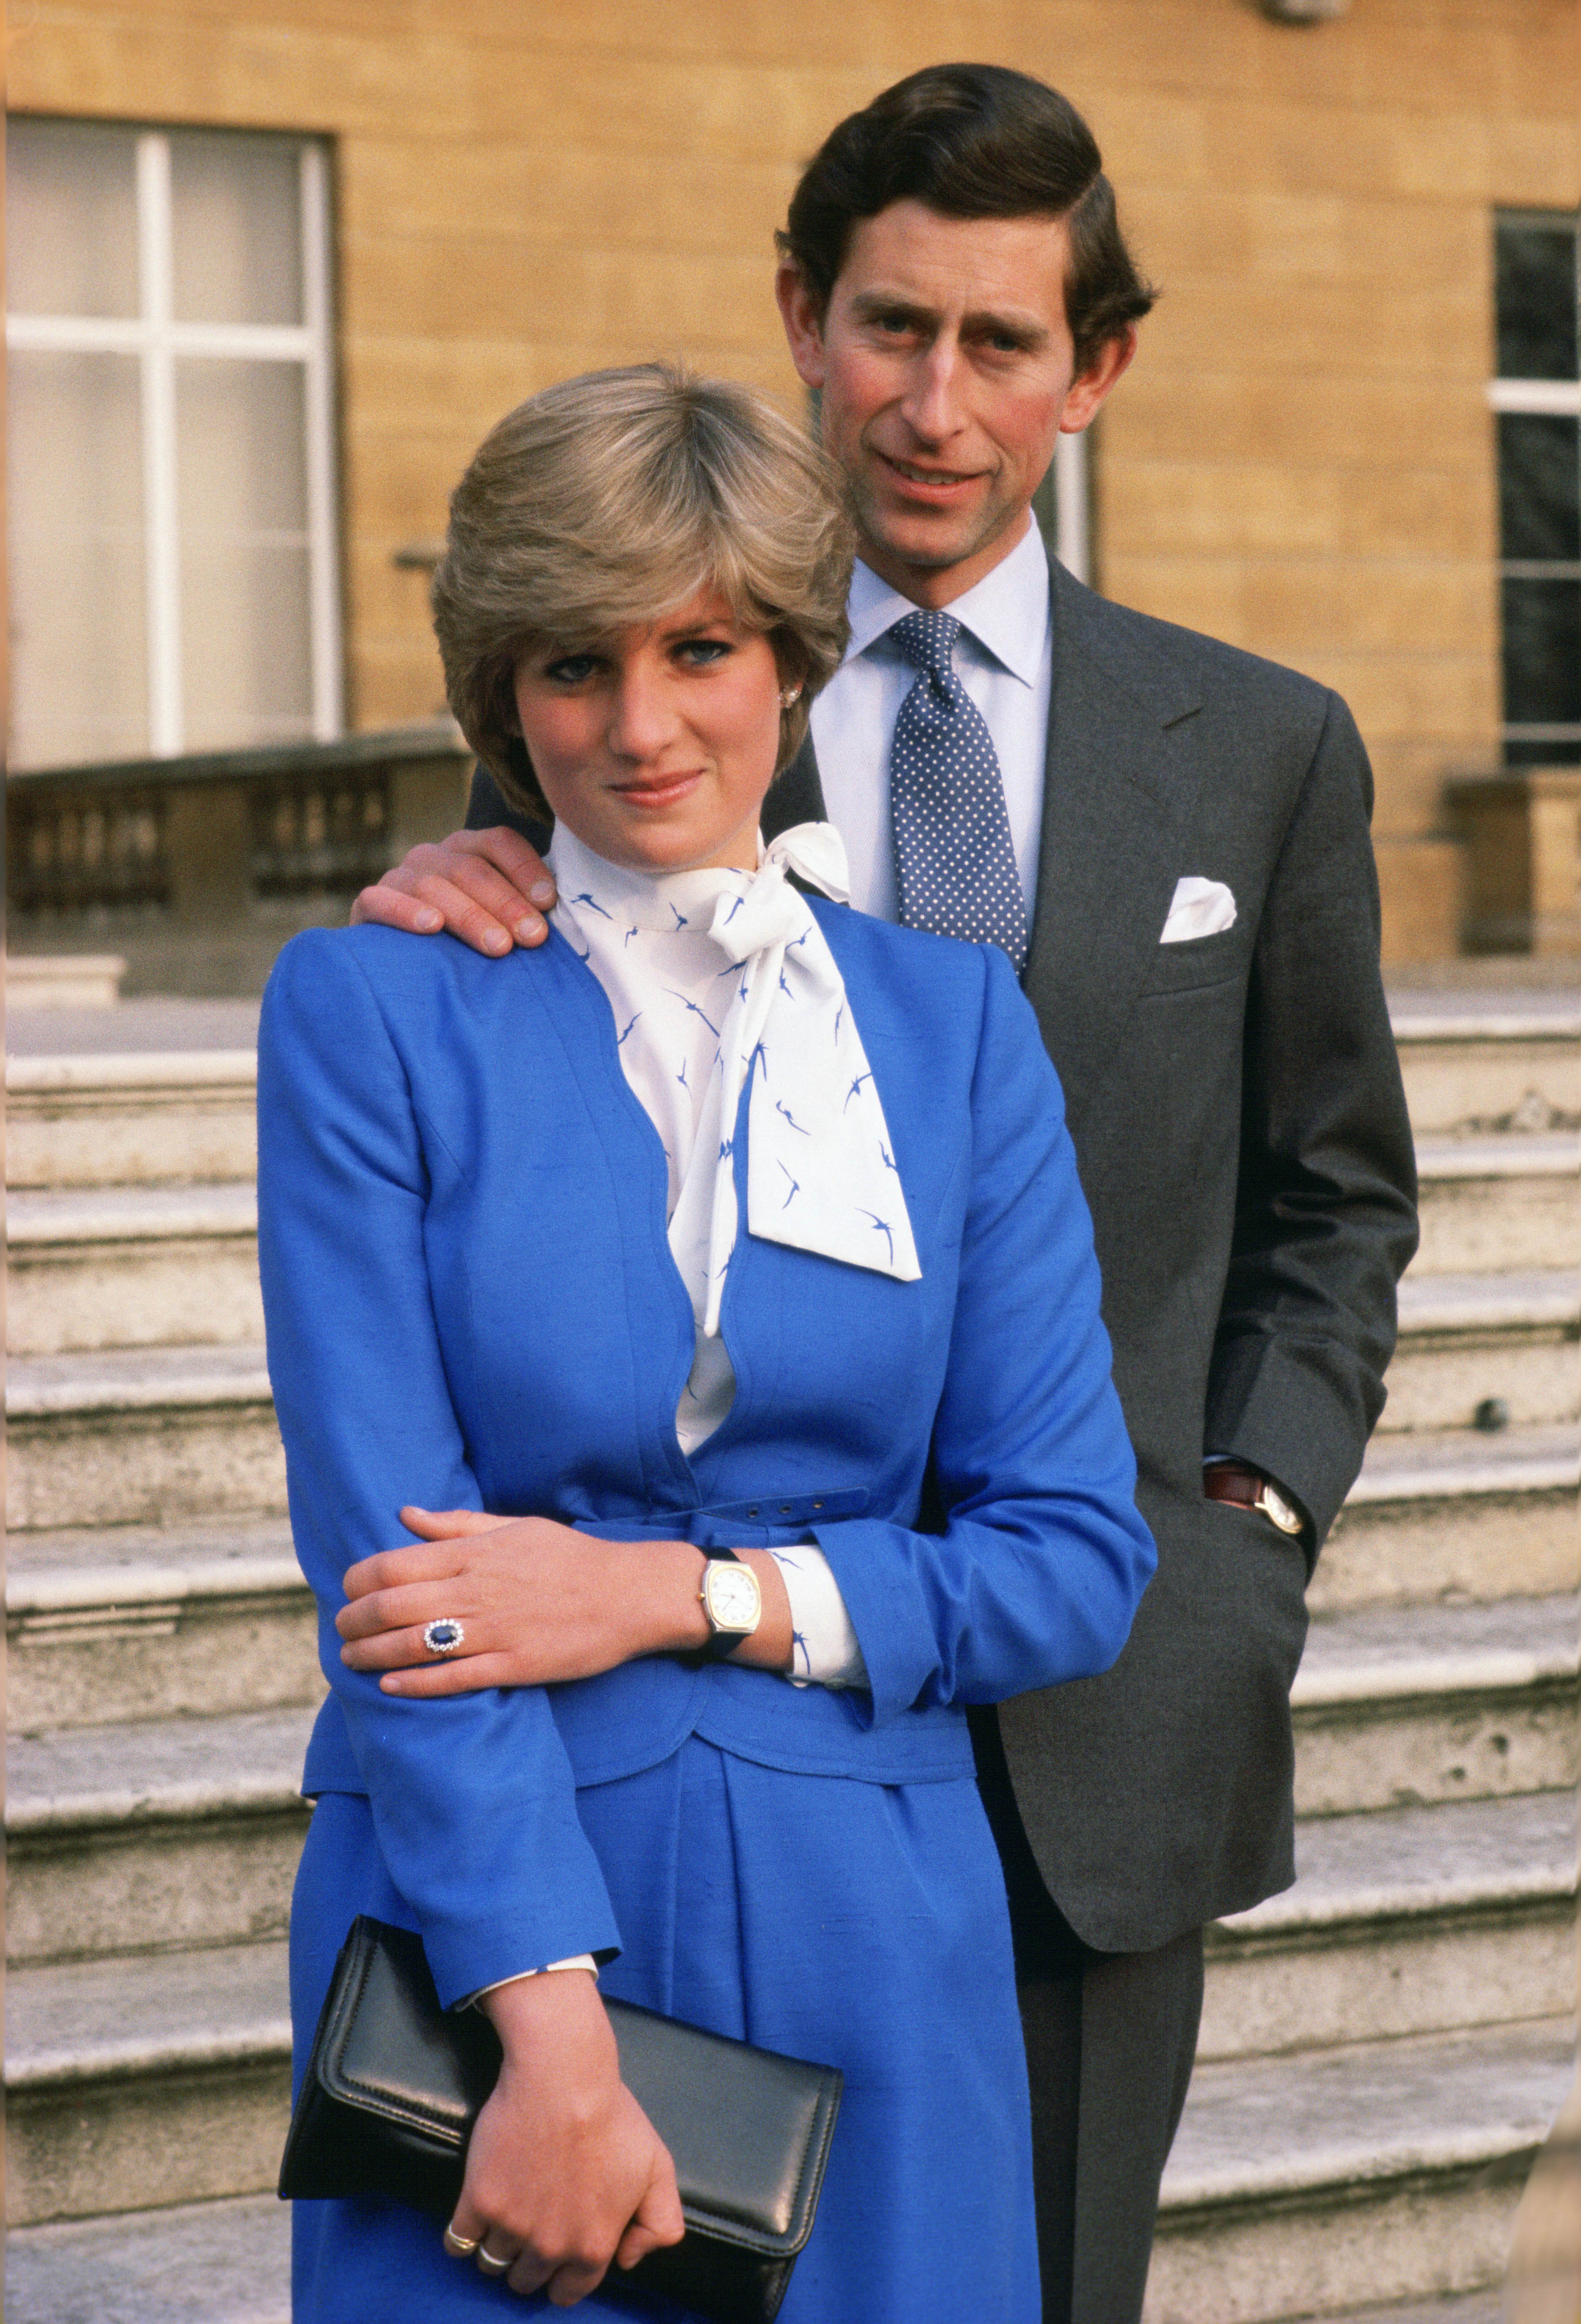 Lady Diana Spencer reveals her sapphire and diamond engagement ring while she and Prince Charles, Prince of Wales pose for photographs in the grounds of Buckingham Palace following the announcement of their engagement. | Source: Getty Images